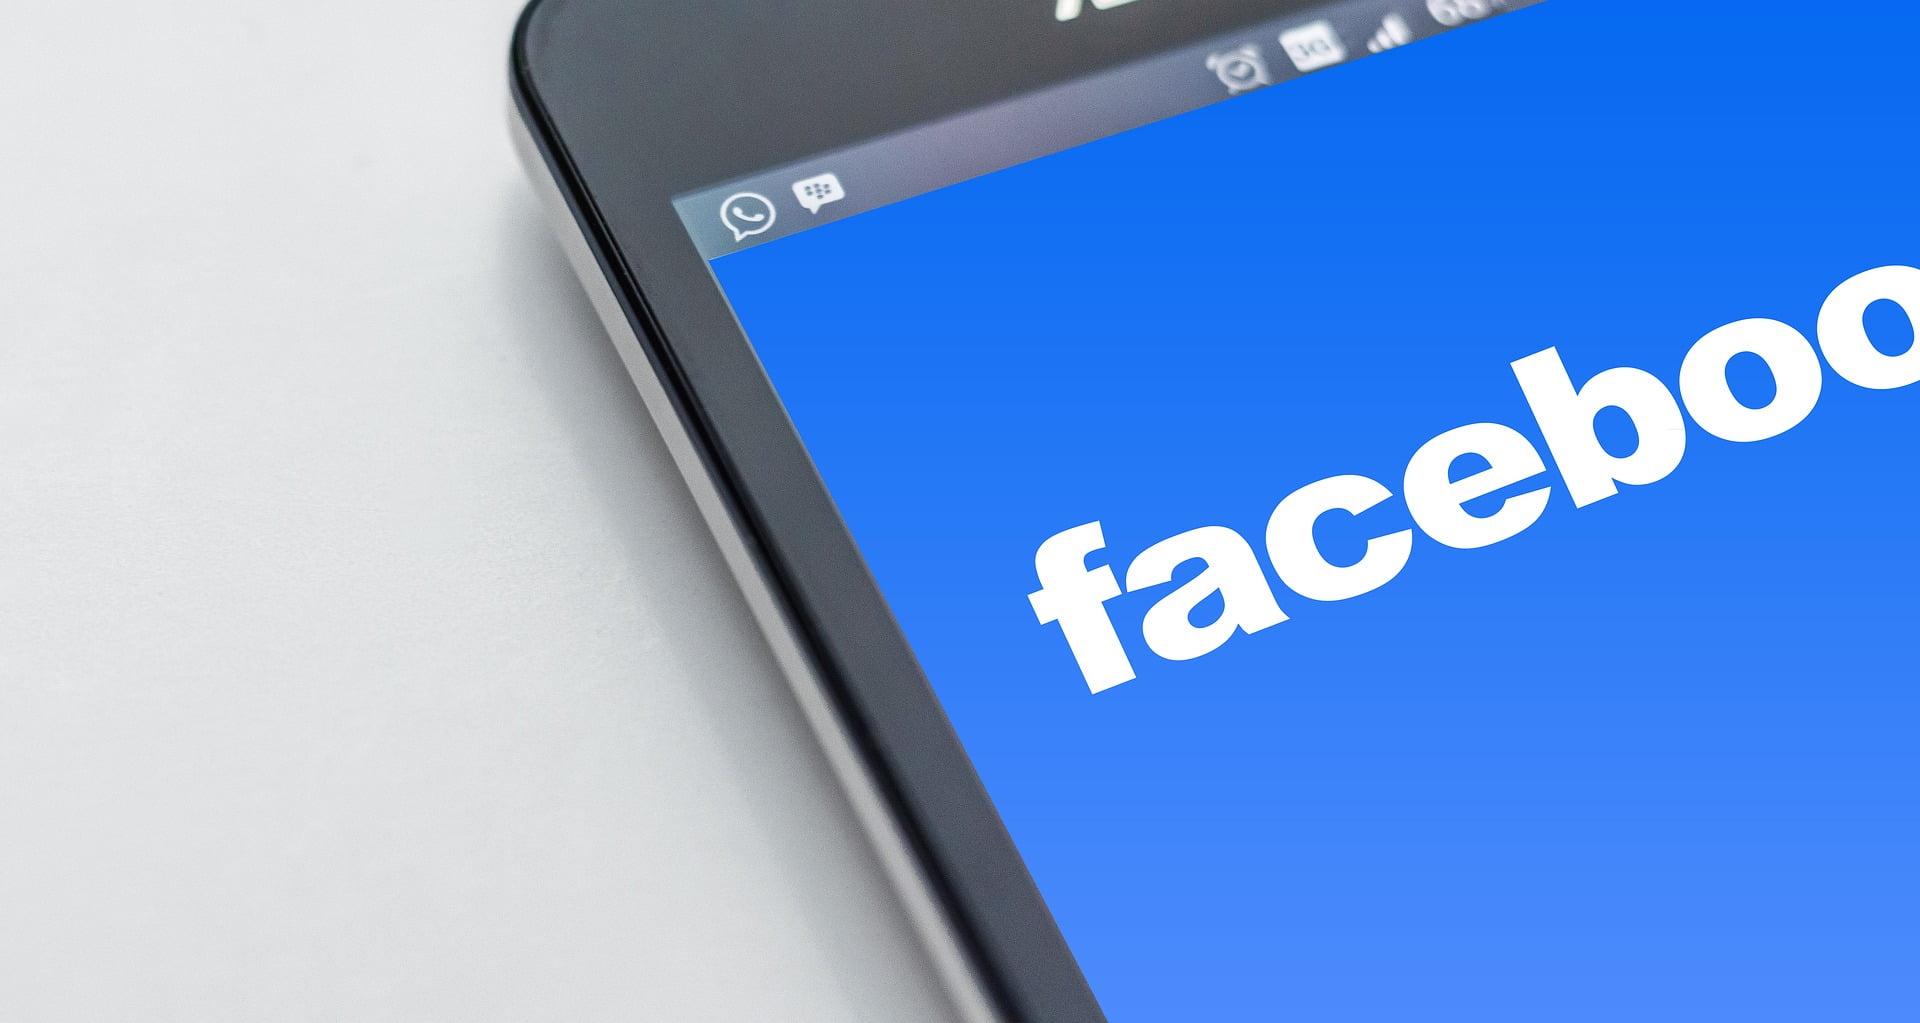 Libra Crypto Crumbles as Facebook Launches Alternative Payments Platform